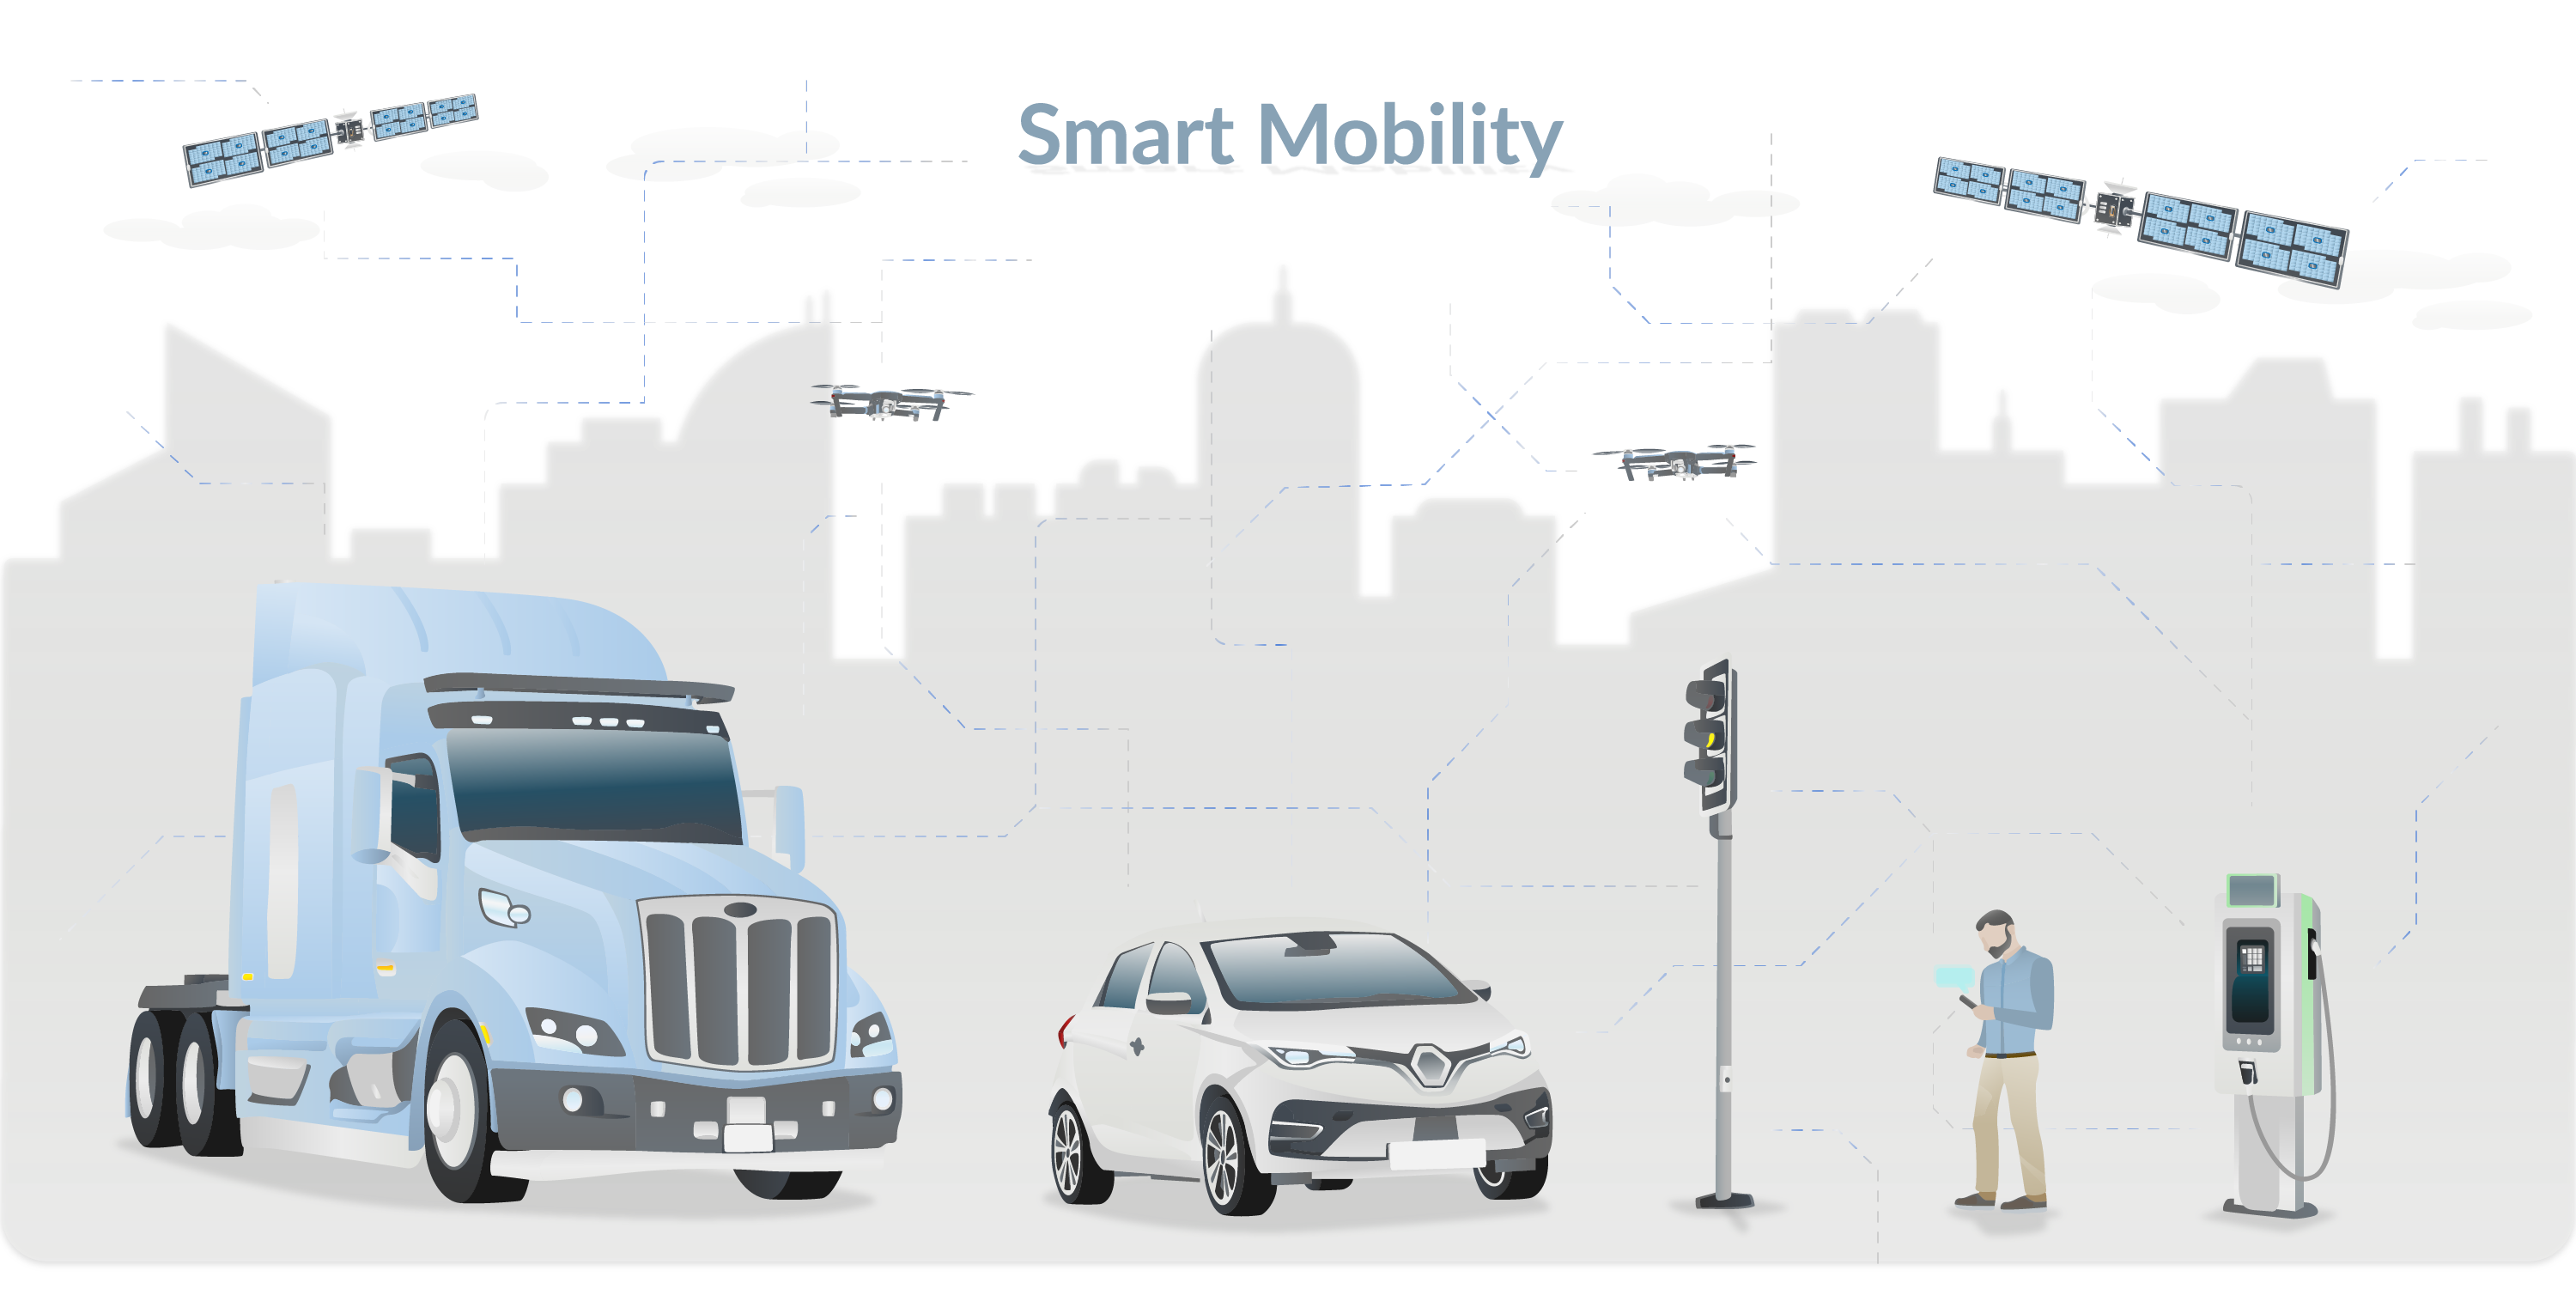 How Smart Mobility Connects bigger cities